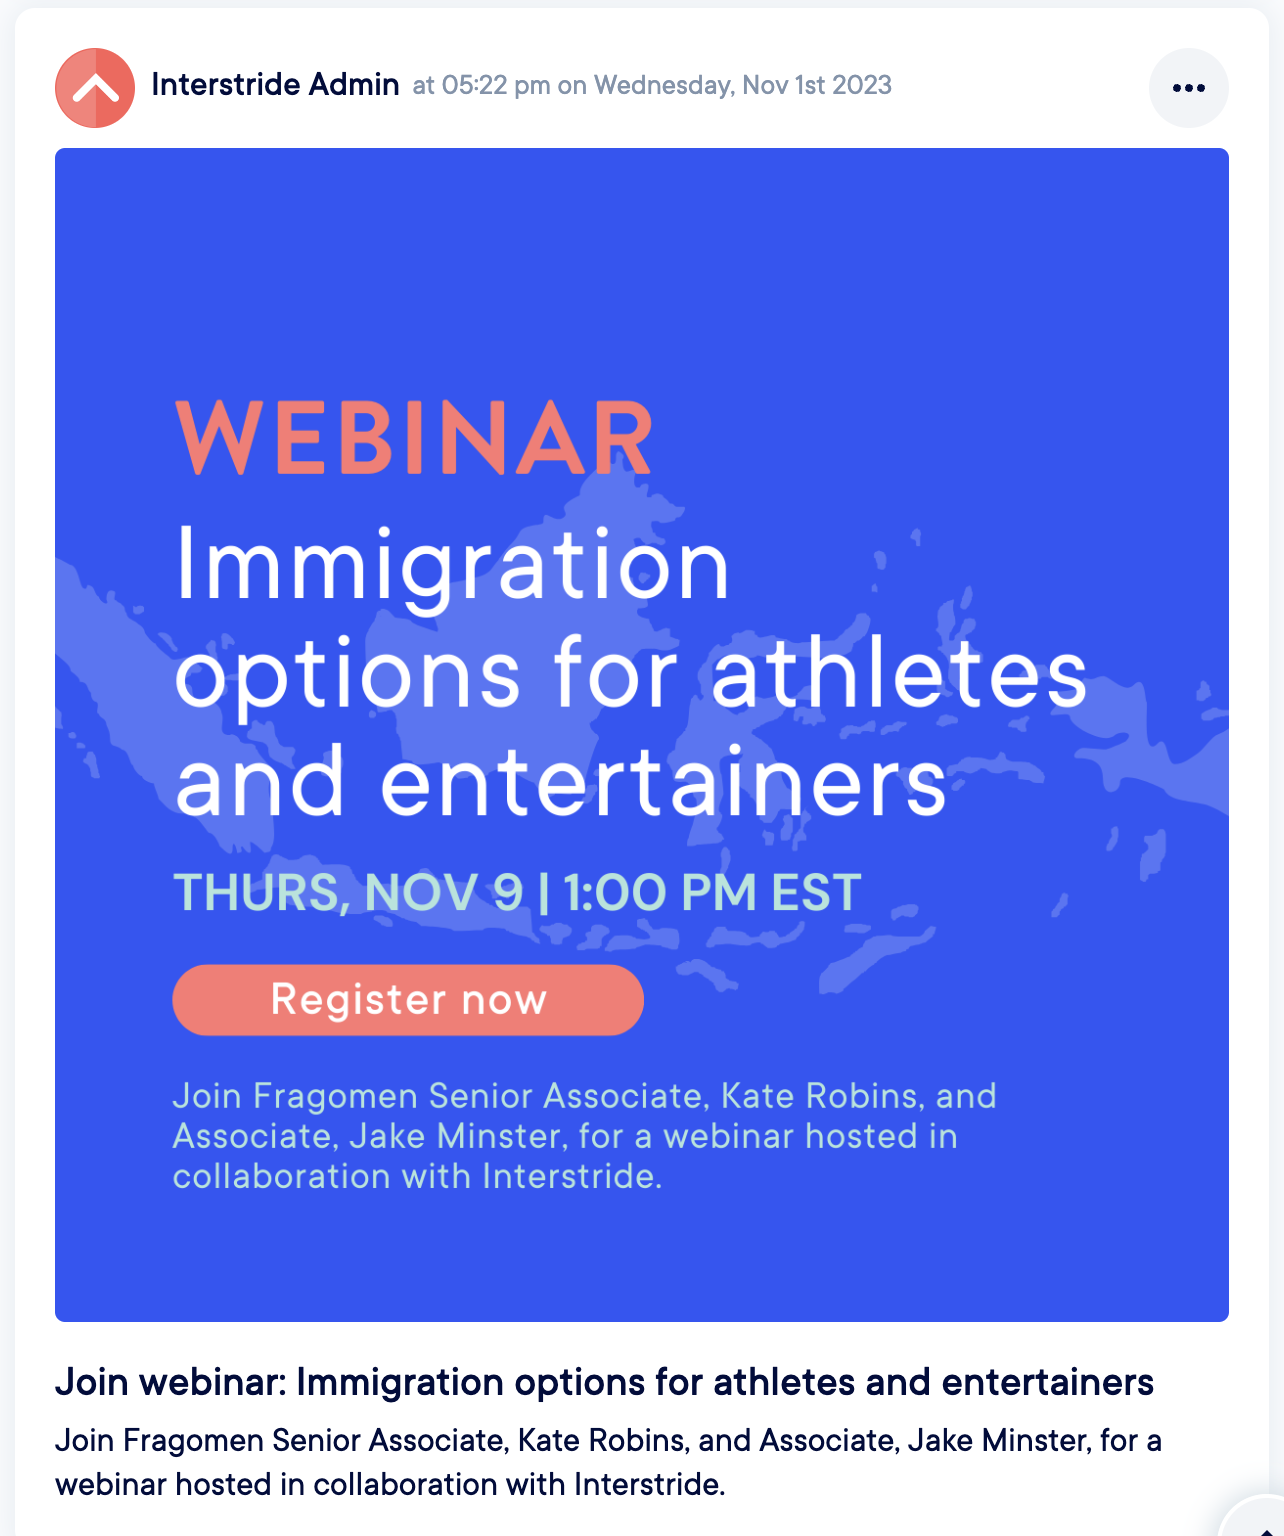 Photo within the Interstride system that says "WEBINAR: Immigration options for athletes and entertainers"